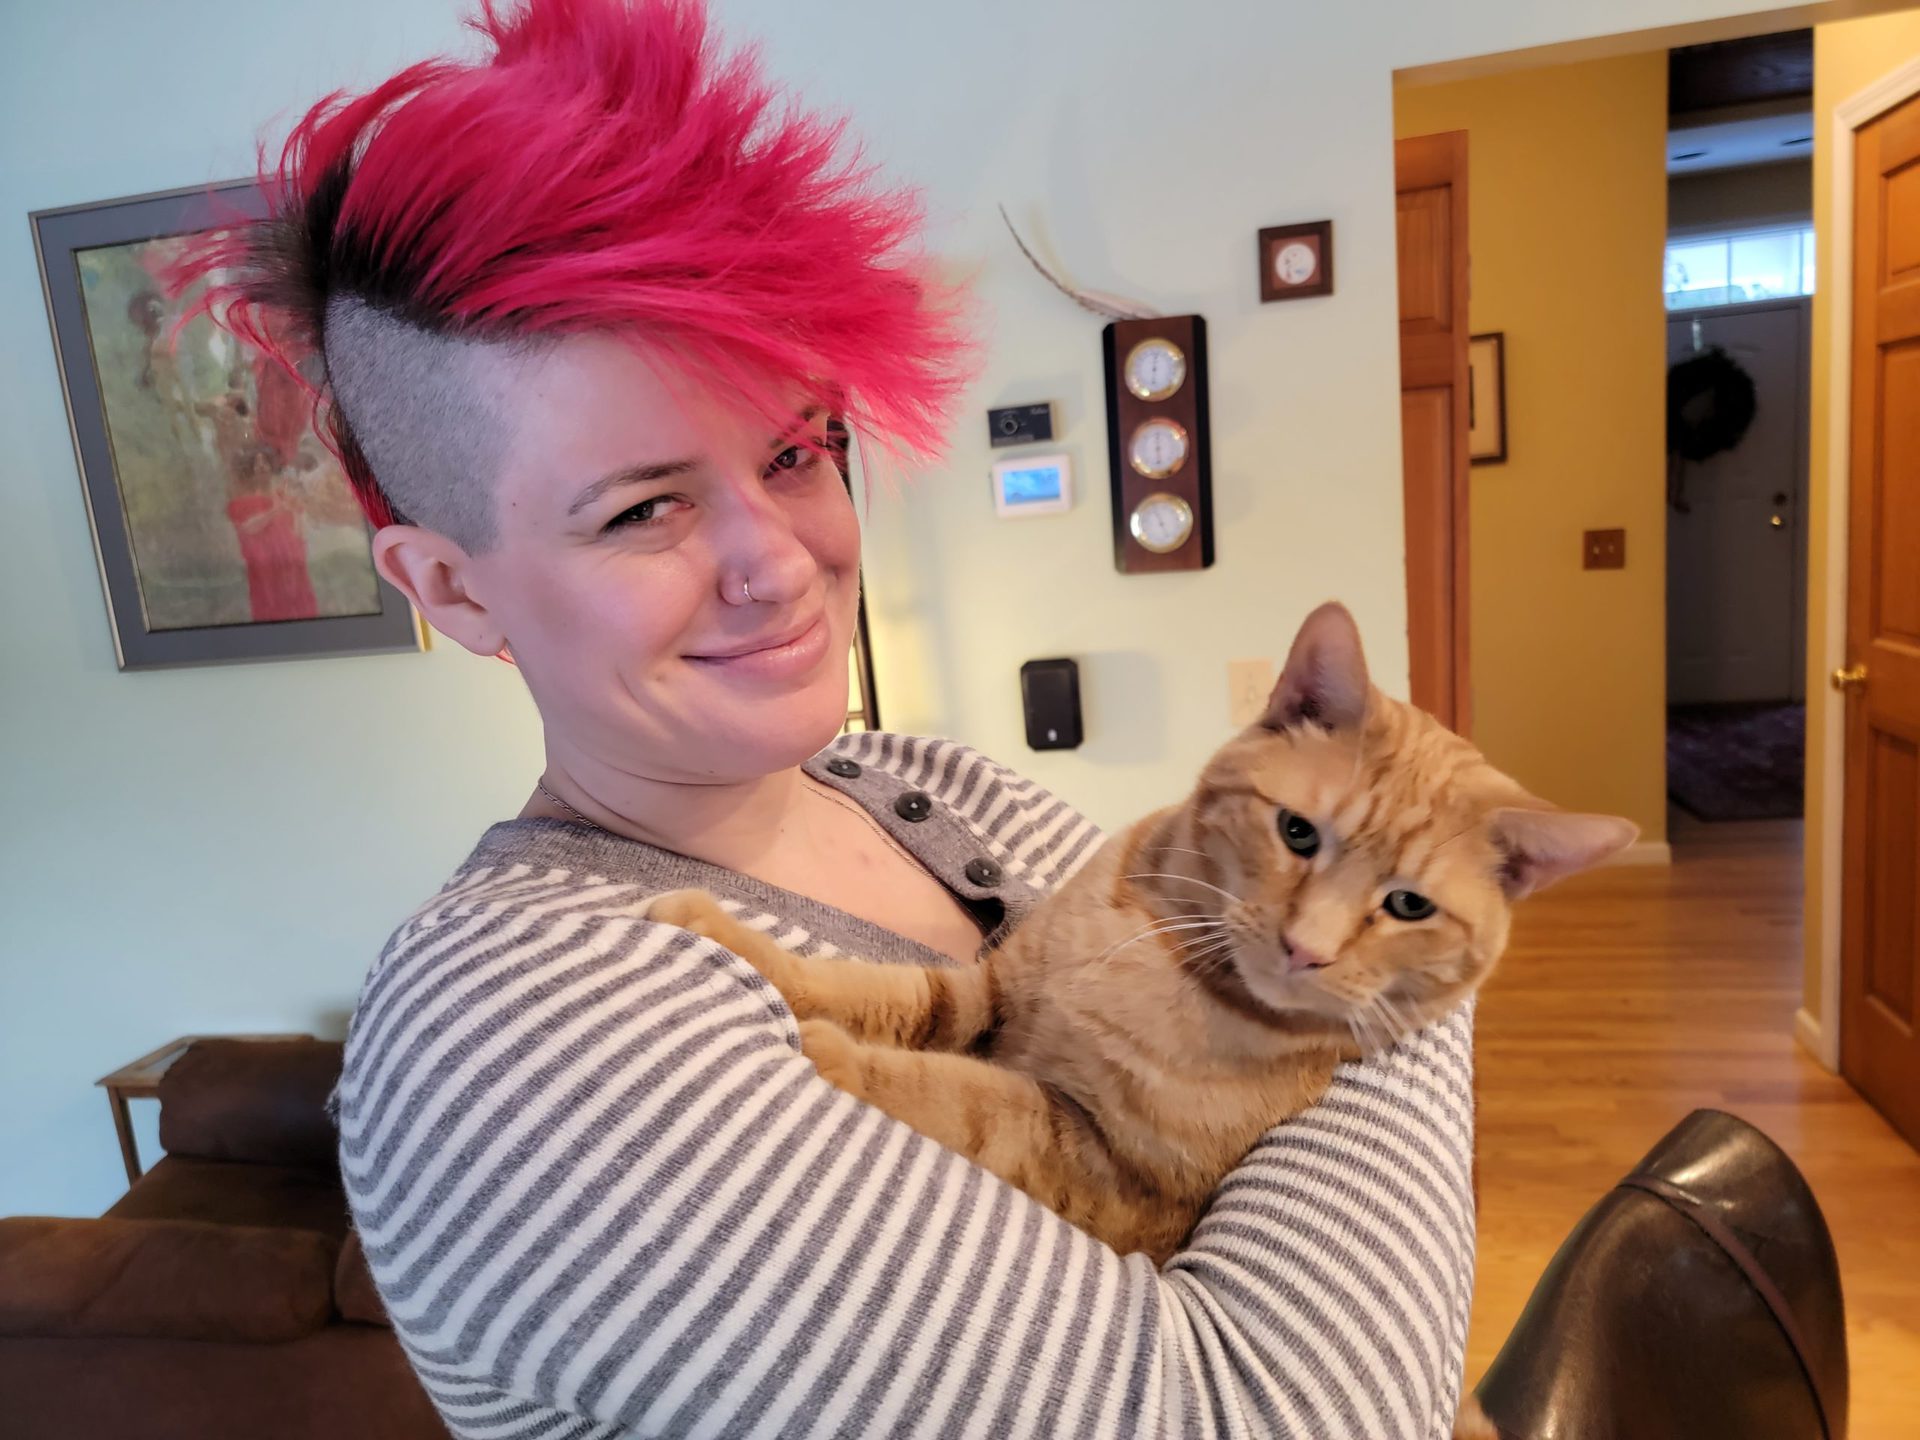 A woman with pink hair holding an orange cat.